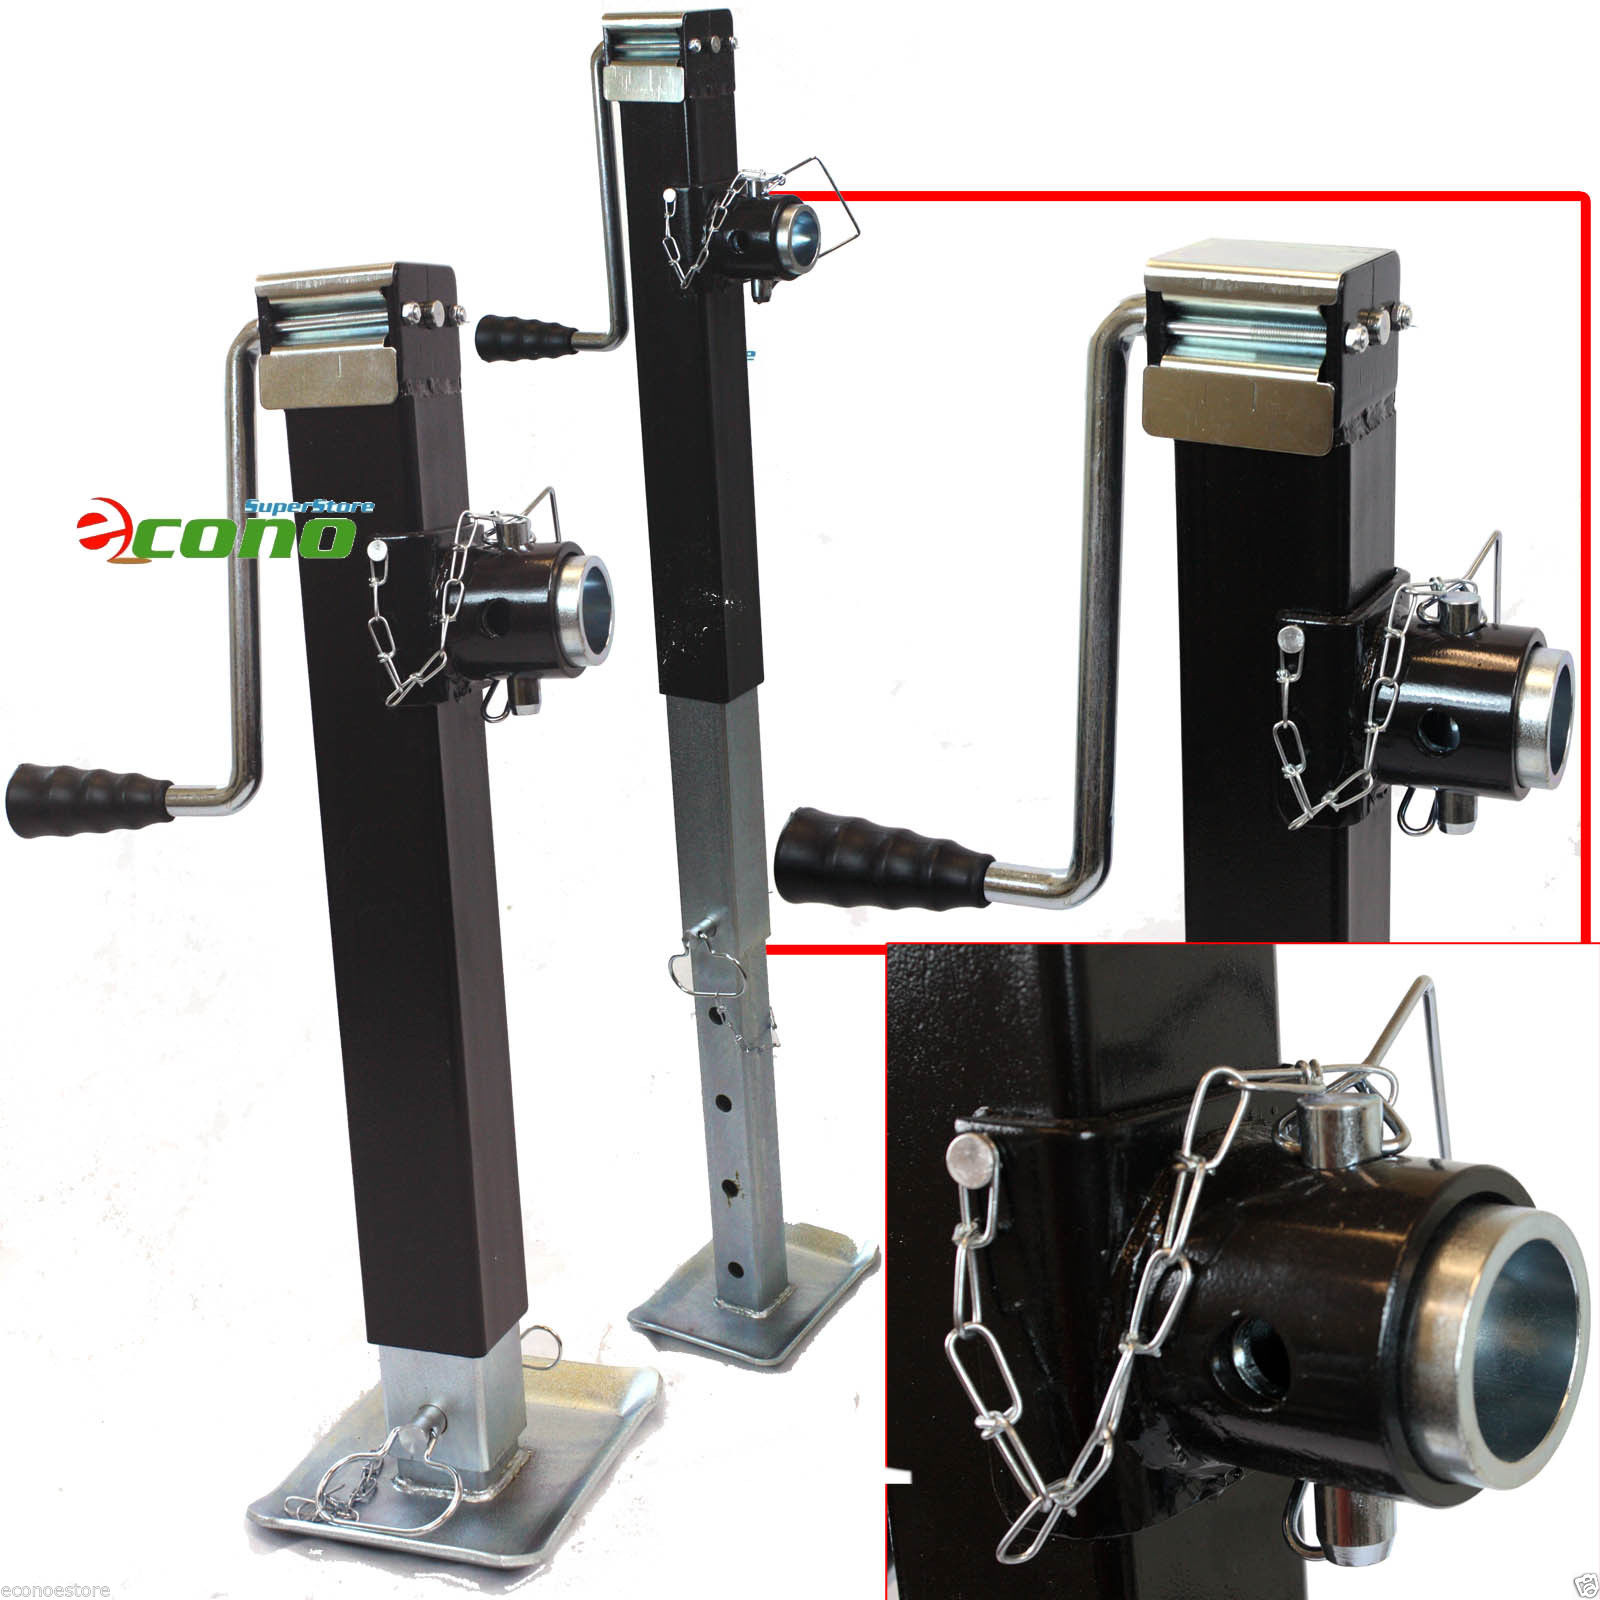 Details about   HEAVY DUTY 8000LB MOUNT TRAILER JACK KIT SIDEWIND ADJUSTABLE TUBE TOWING HAULING